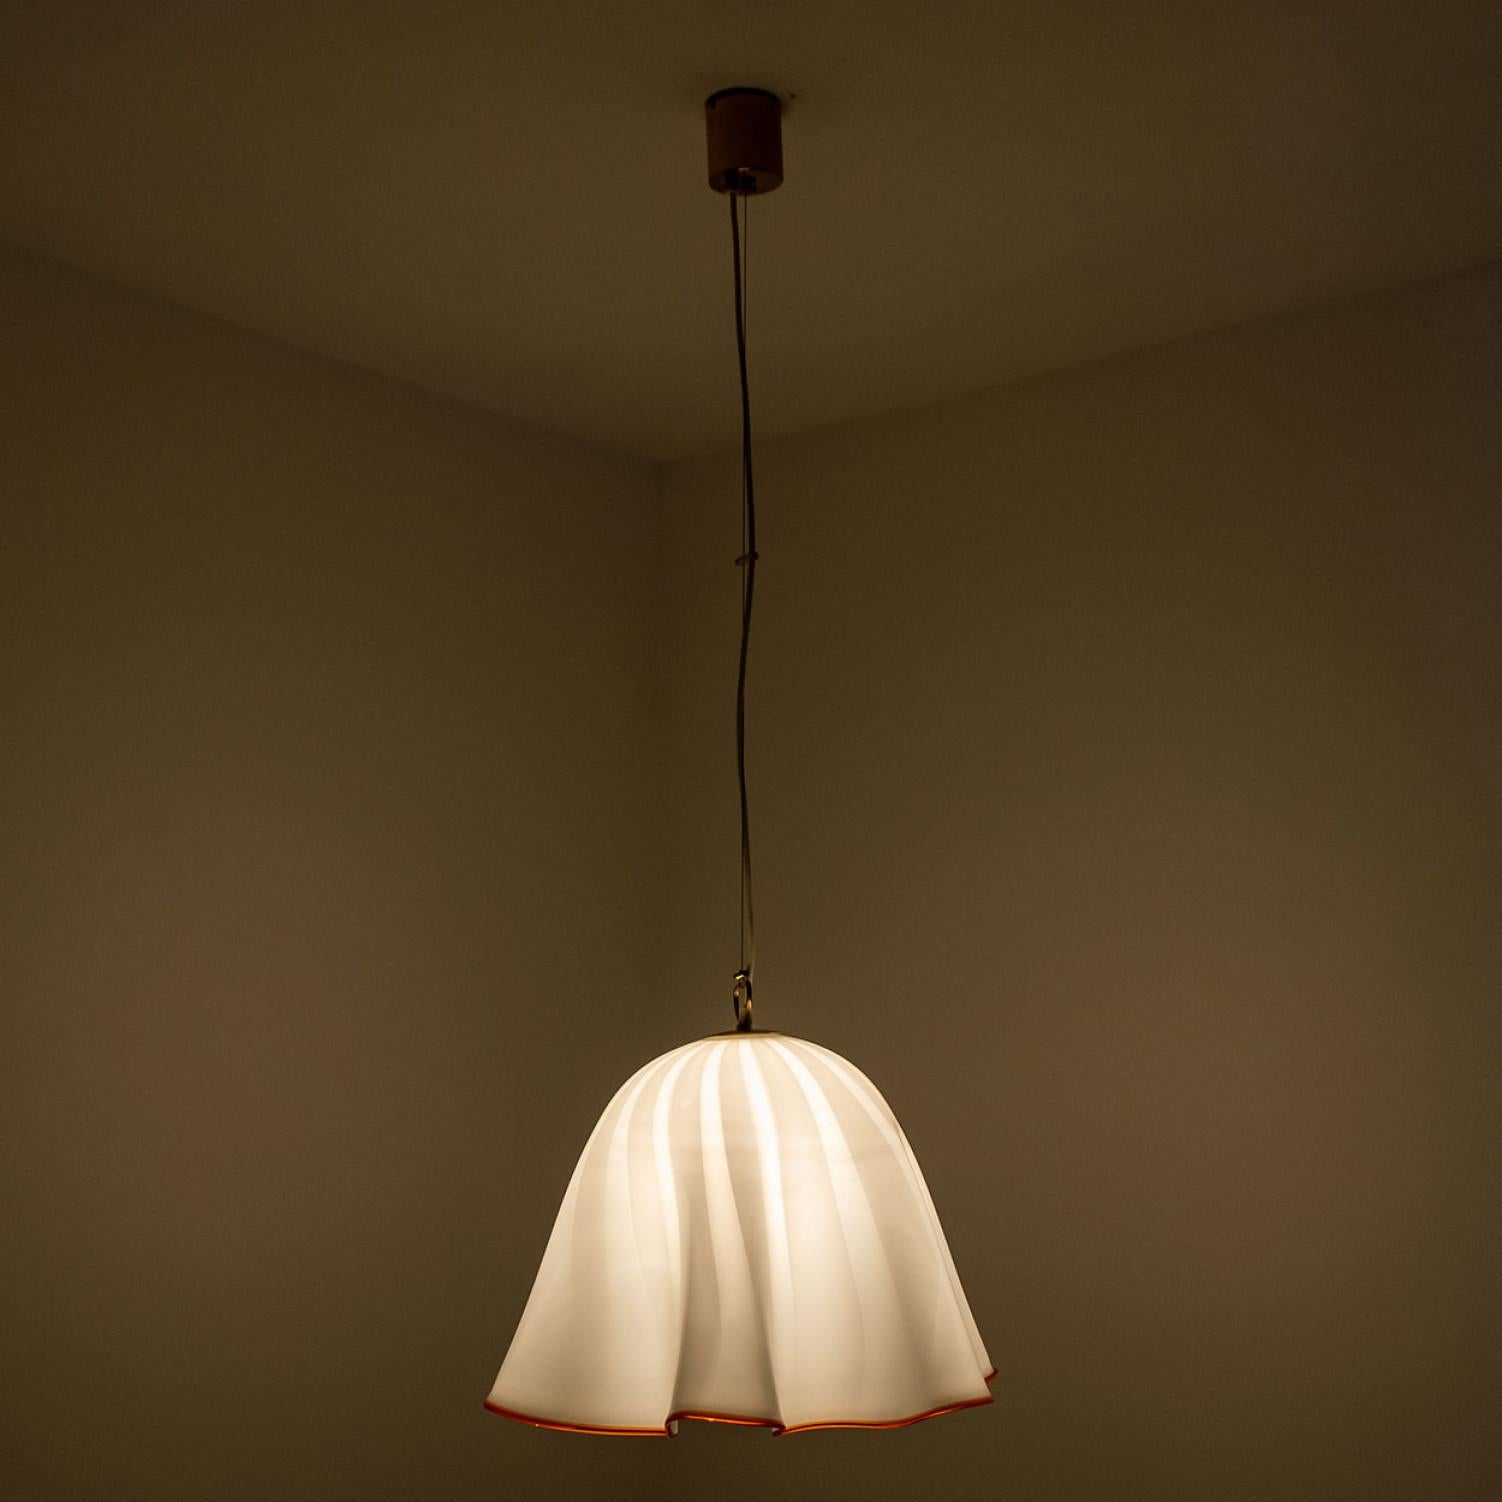 1 of the 2 Large Murano Glass Fazzoletto Pendant Light by J.T. Kalmar, 1960s For Sale 10